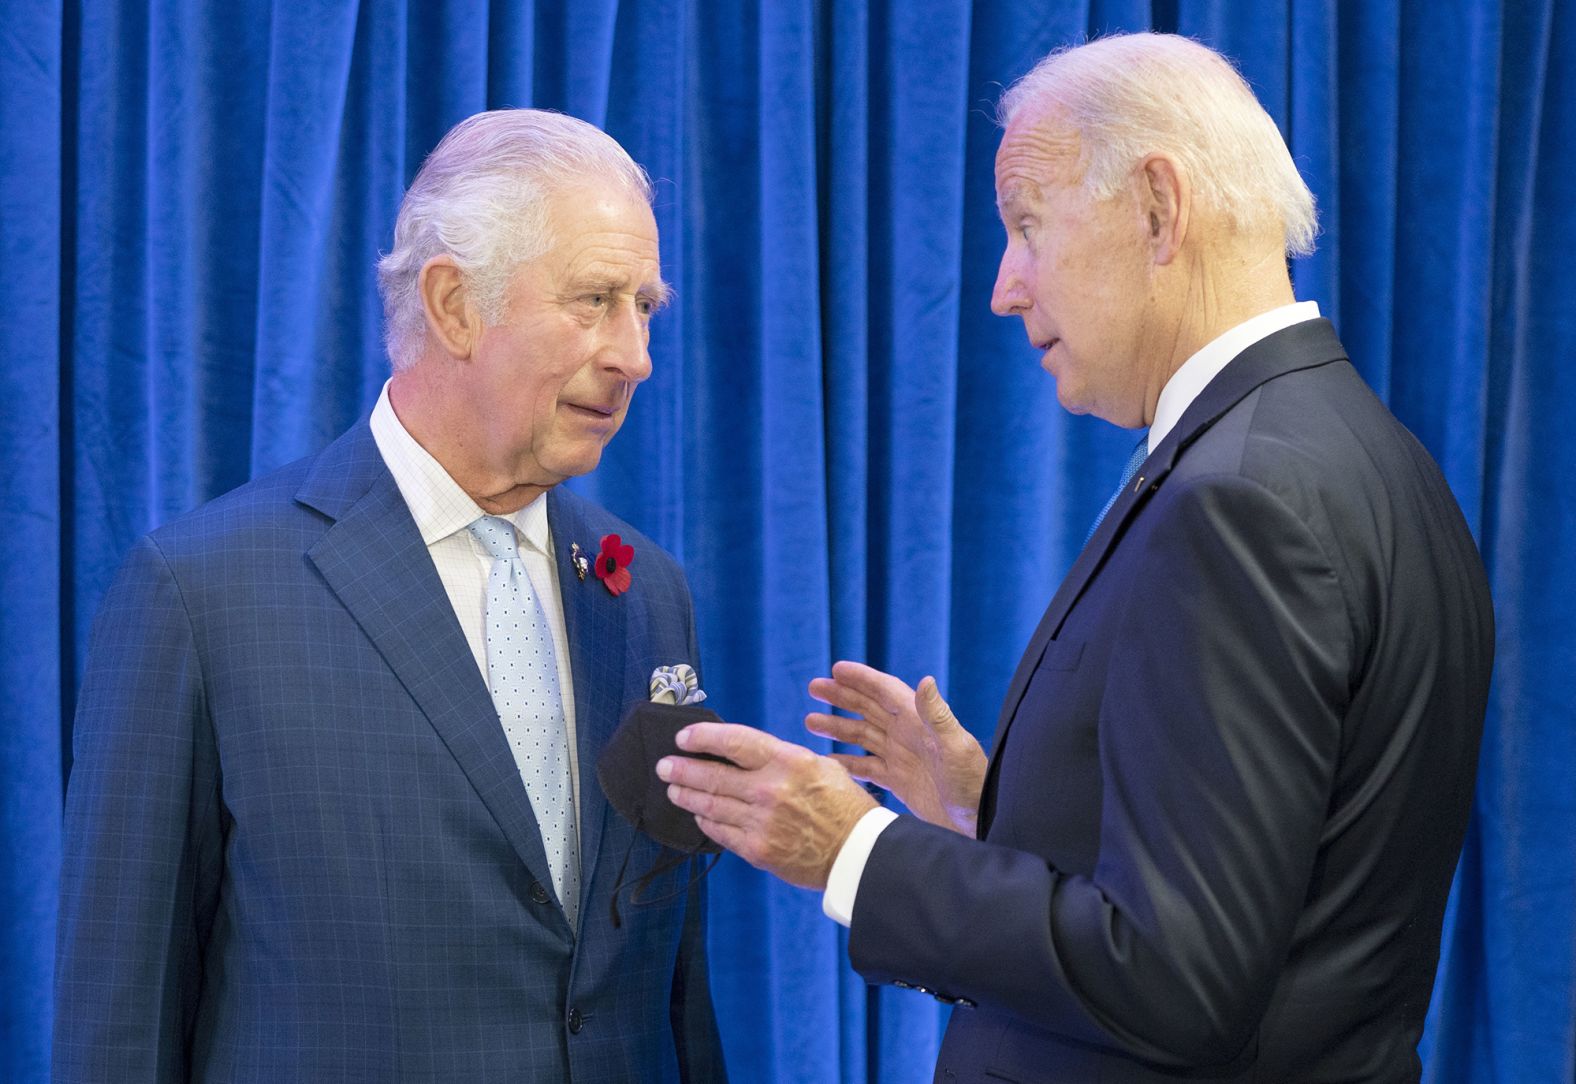 Biden speaks with Britain's Prince Charles ahead of their bilateral meeting on Tuesday.